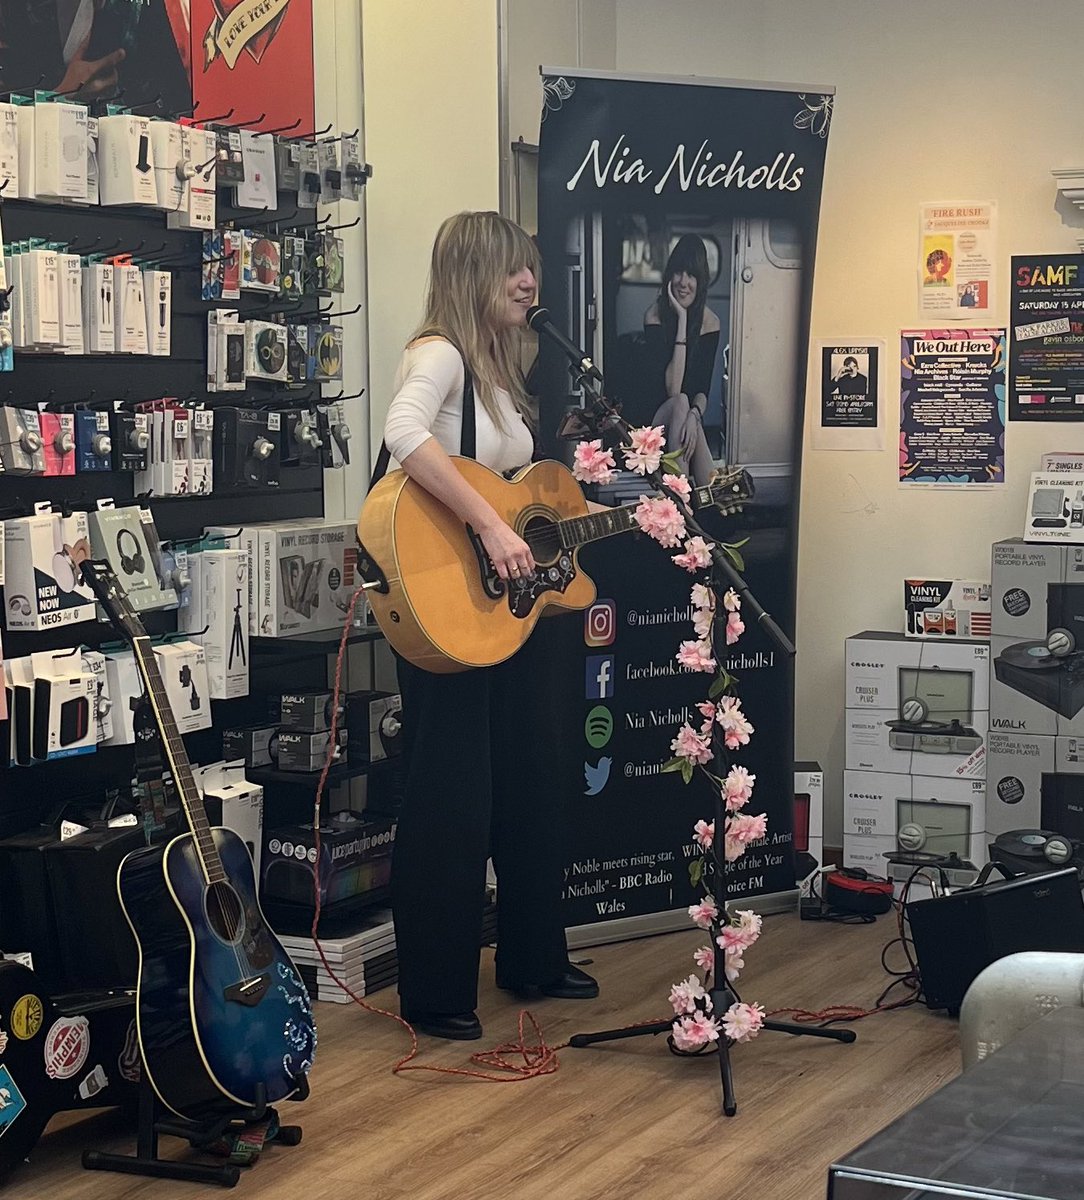 The wonderful @nianicholls is here!! She’s gonna be putting on a cracking performance for us the next hour if you’re in the area come pop in or check her out on Spotify so you don’t miss out! 😉